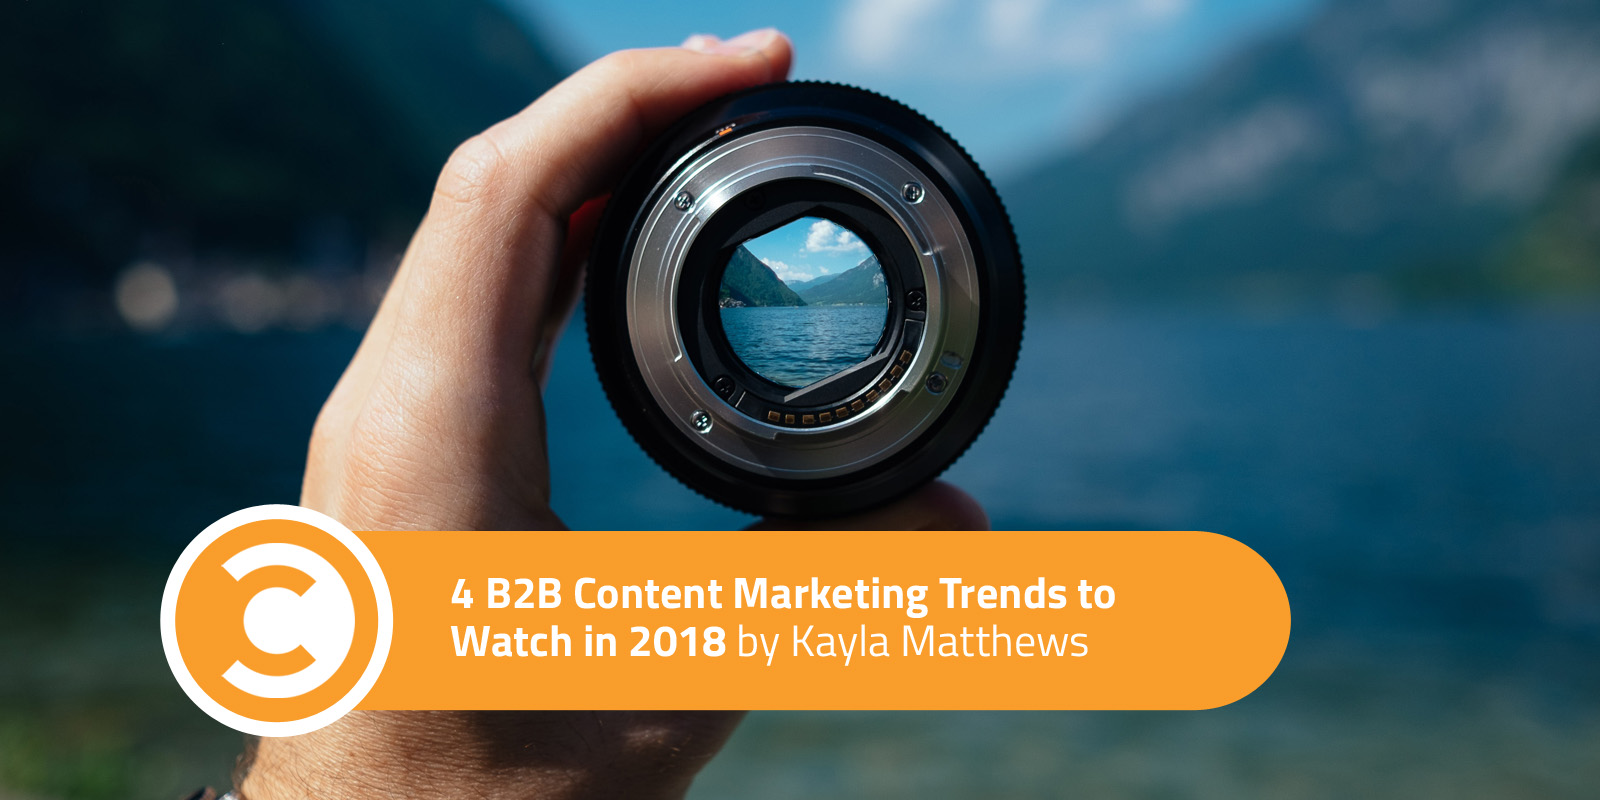 4 B2B Content Marketing Trends to Watch in 2018